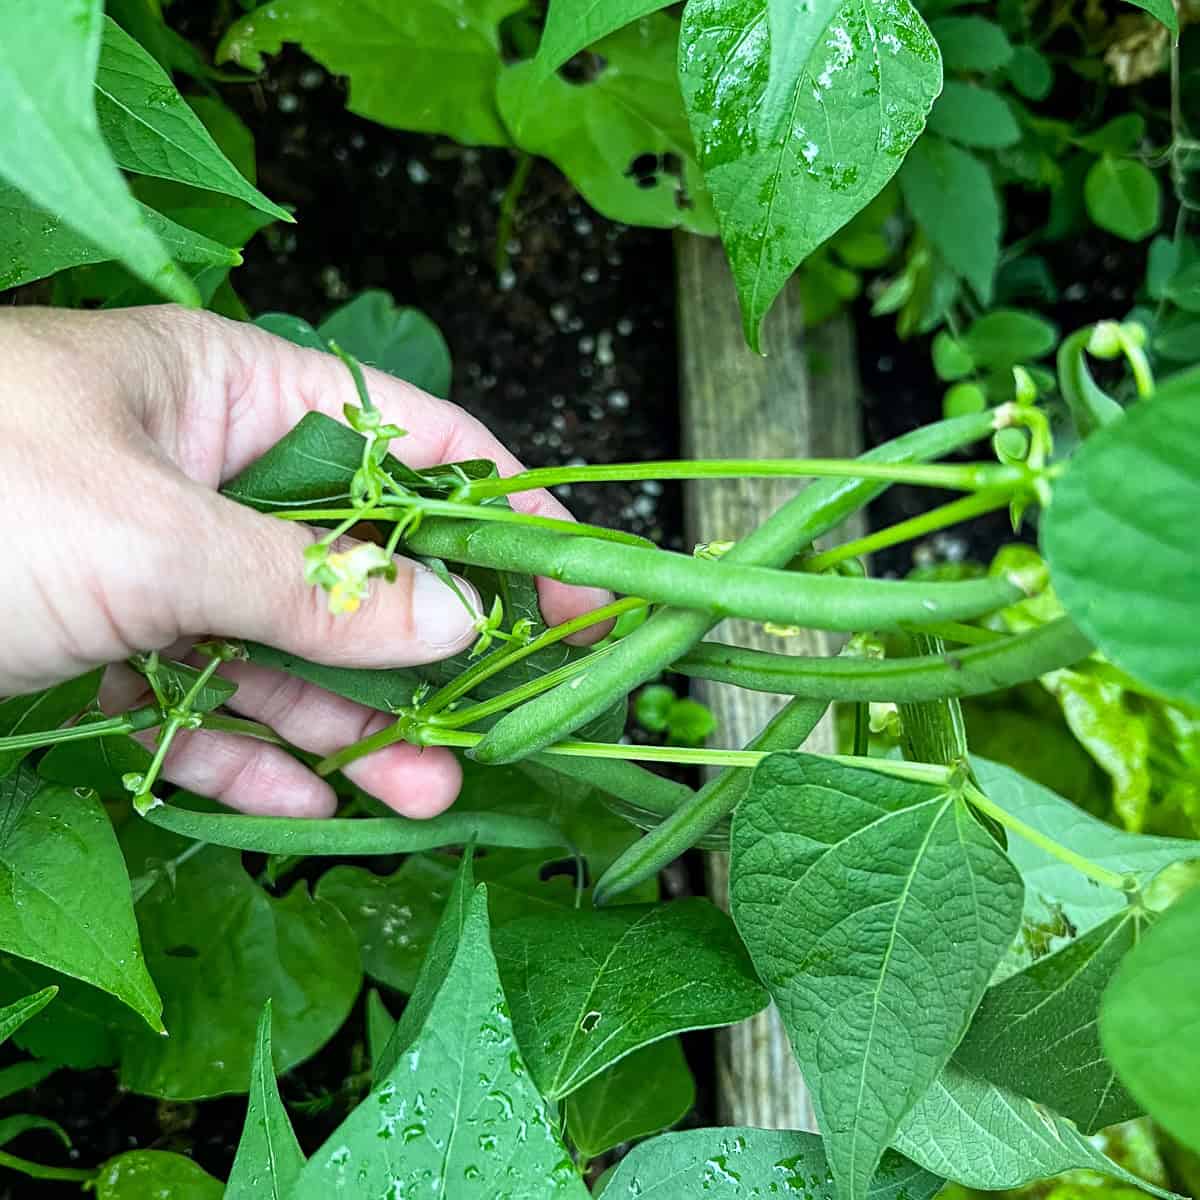 An image of a woman's hand holding green beans.